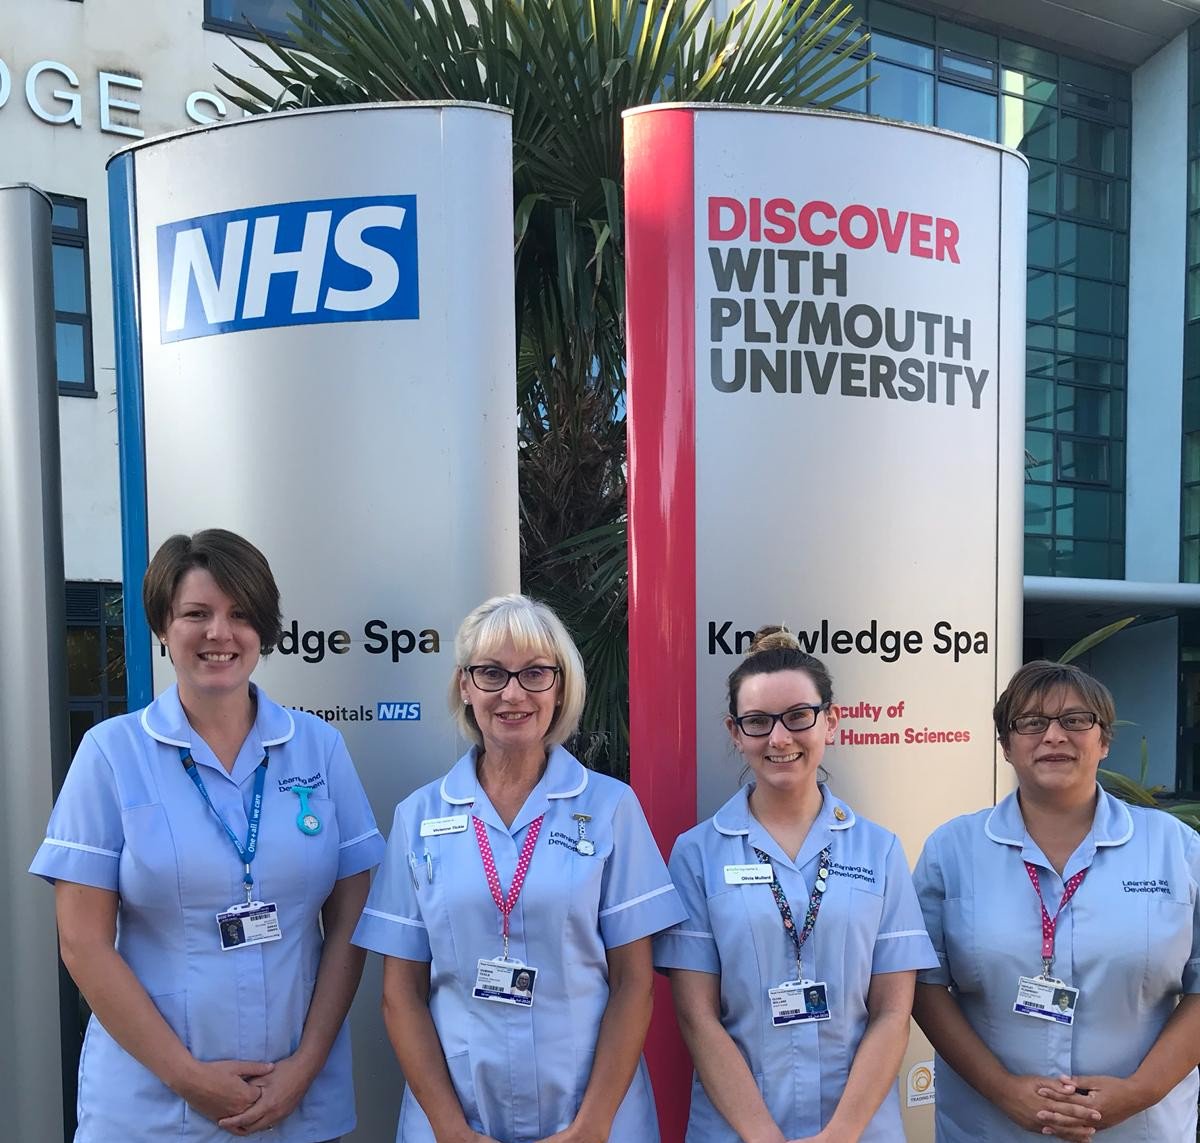 Introducing our team of Clinical Practice Educators, including some new faces!
From left to right:
Karen Evans, Viviene Tickle, Olivia Mullard and Hayley Plowright.

(Not pictured: Louise Parkes) 

We are available for all student,  mentor and preceptee enquiries.
@RCHTWeCare